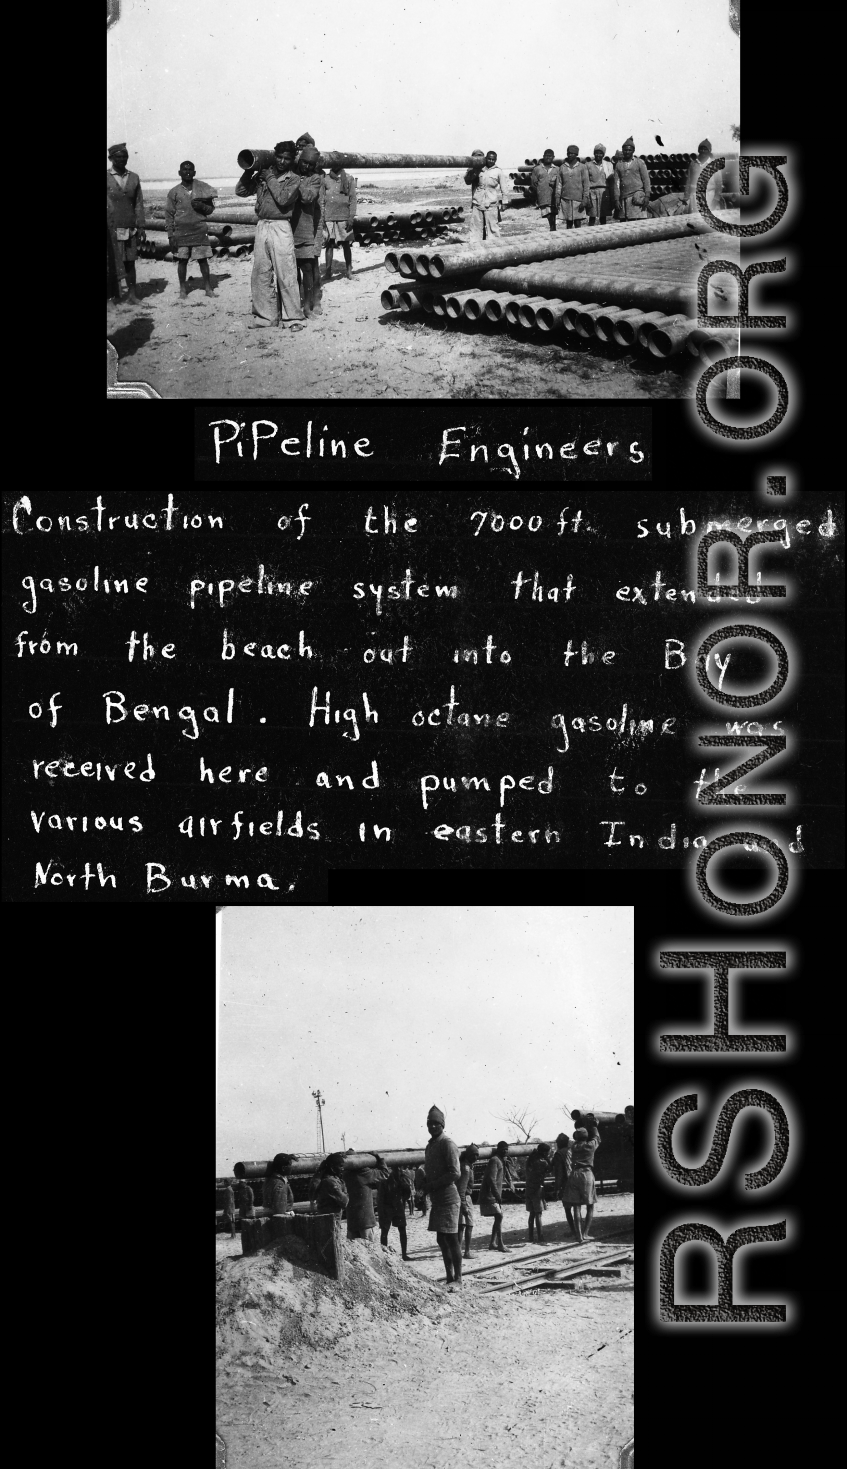 "Pipeline Engineers: Construction of the 7000 ft. submerged gasoline pipeline system that extended from the beach out into the Bay of Bengal. High octane gasoline was received here and pumped to the various airfields in Eastern India and North Burma."